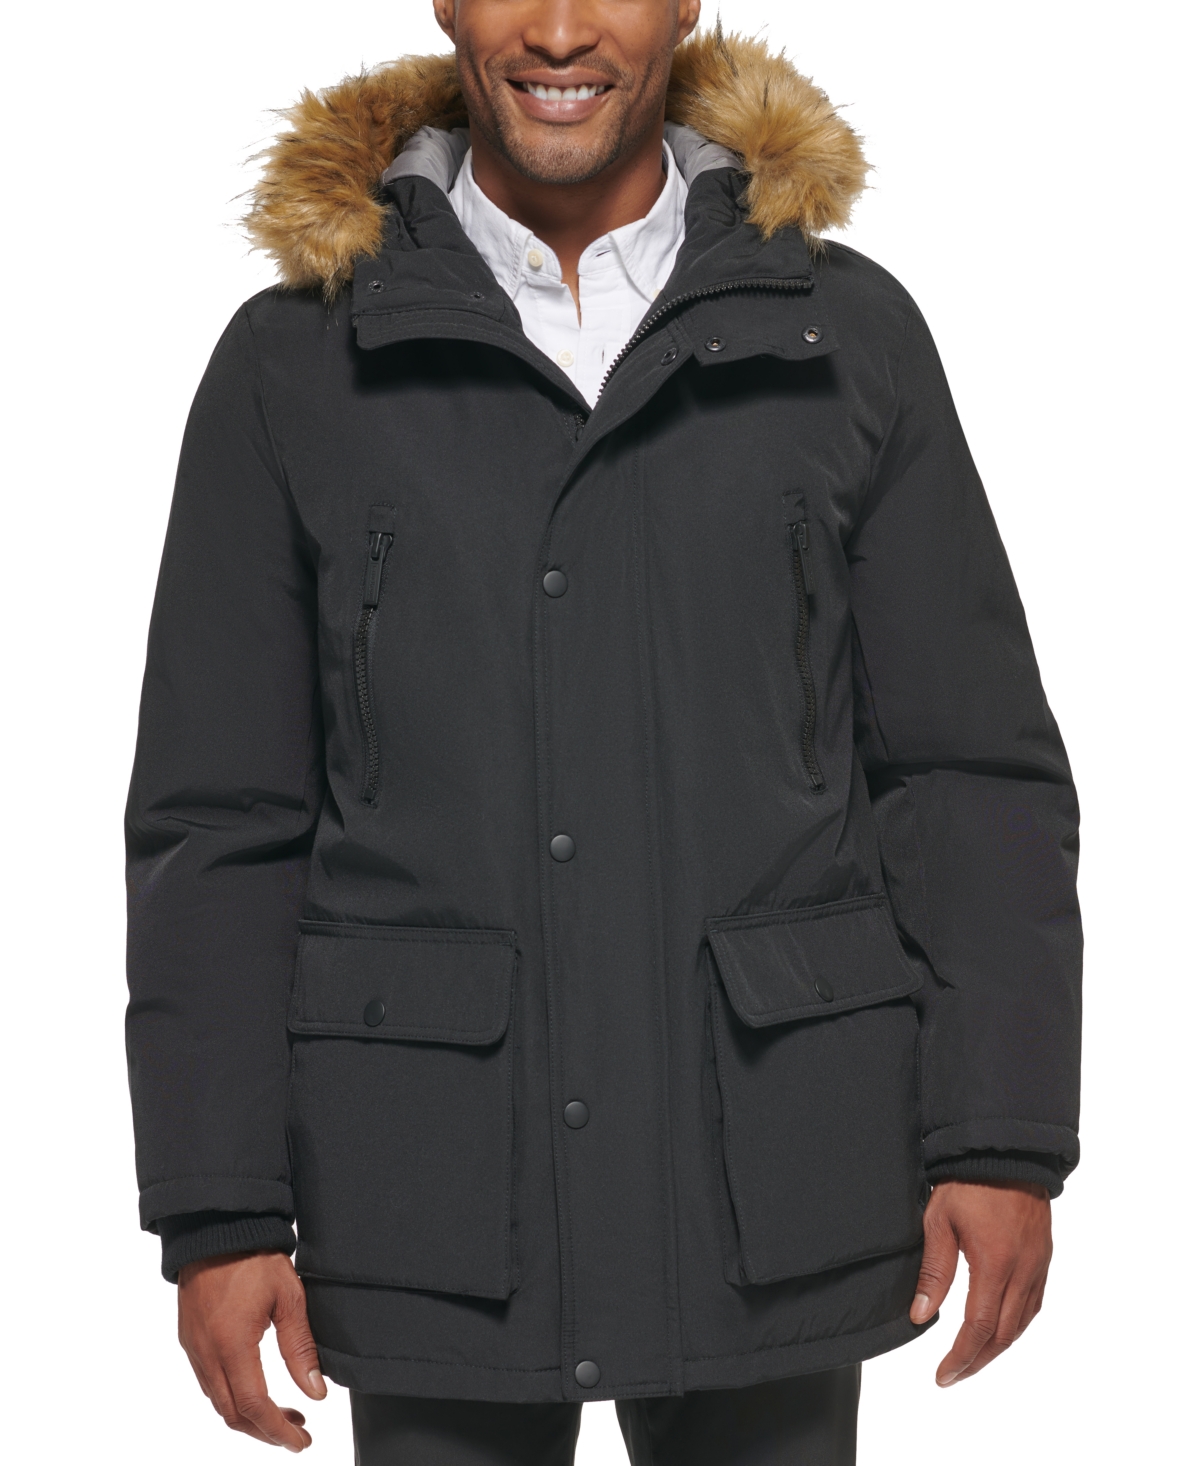 Men's Parka with a Faux Fur-Hood Jacket, Created for Macy's - Heather Charcoal